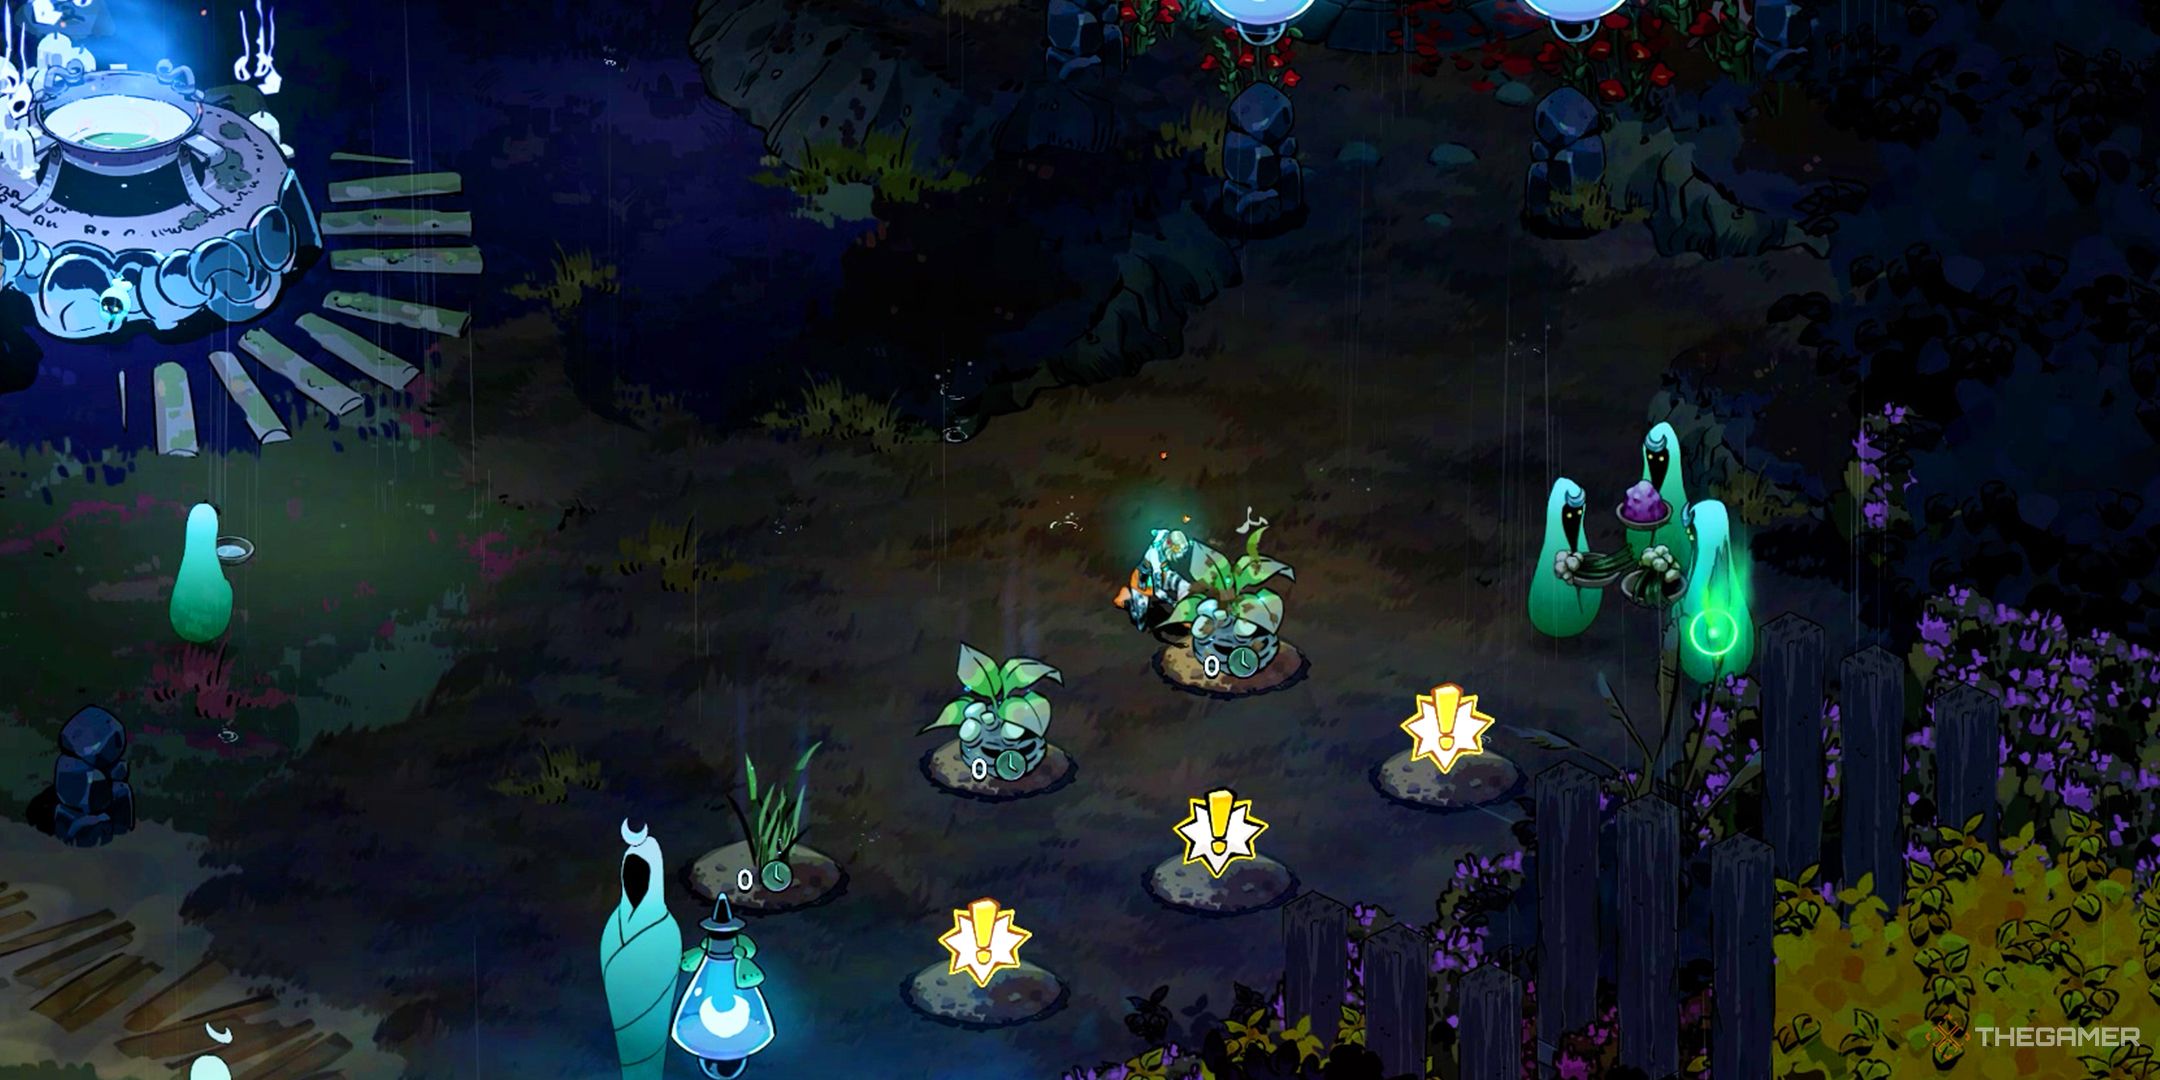 A player harvesting Mandrake root in Hades 2